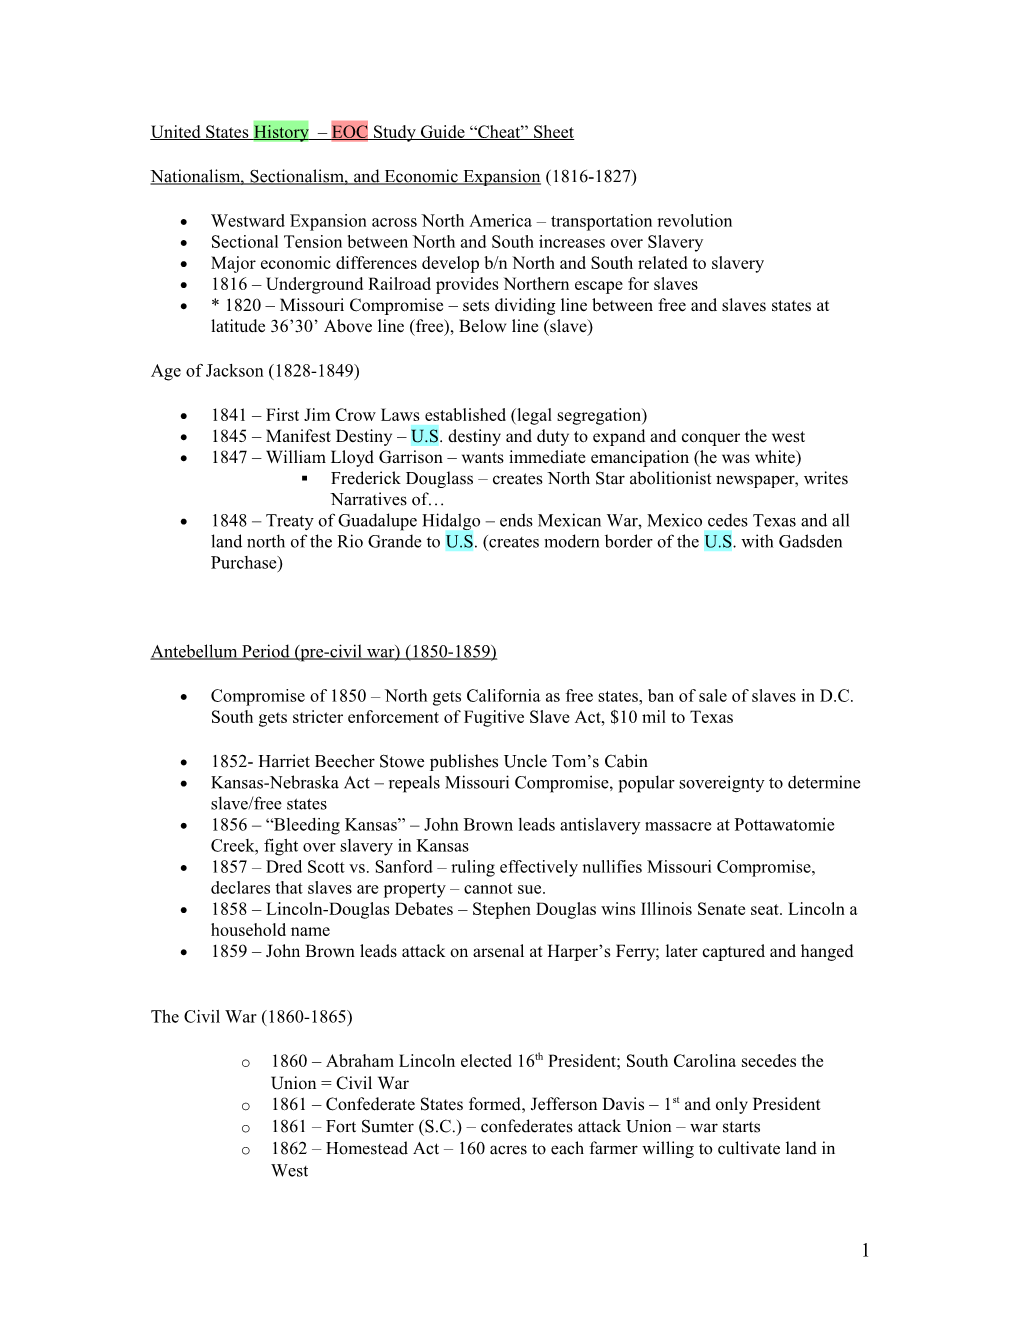 United States History Honors EOC Study Guide Cheat Sheet Mr